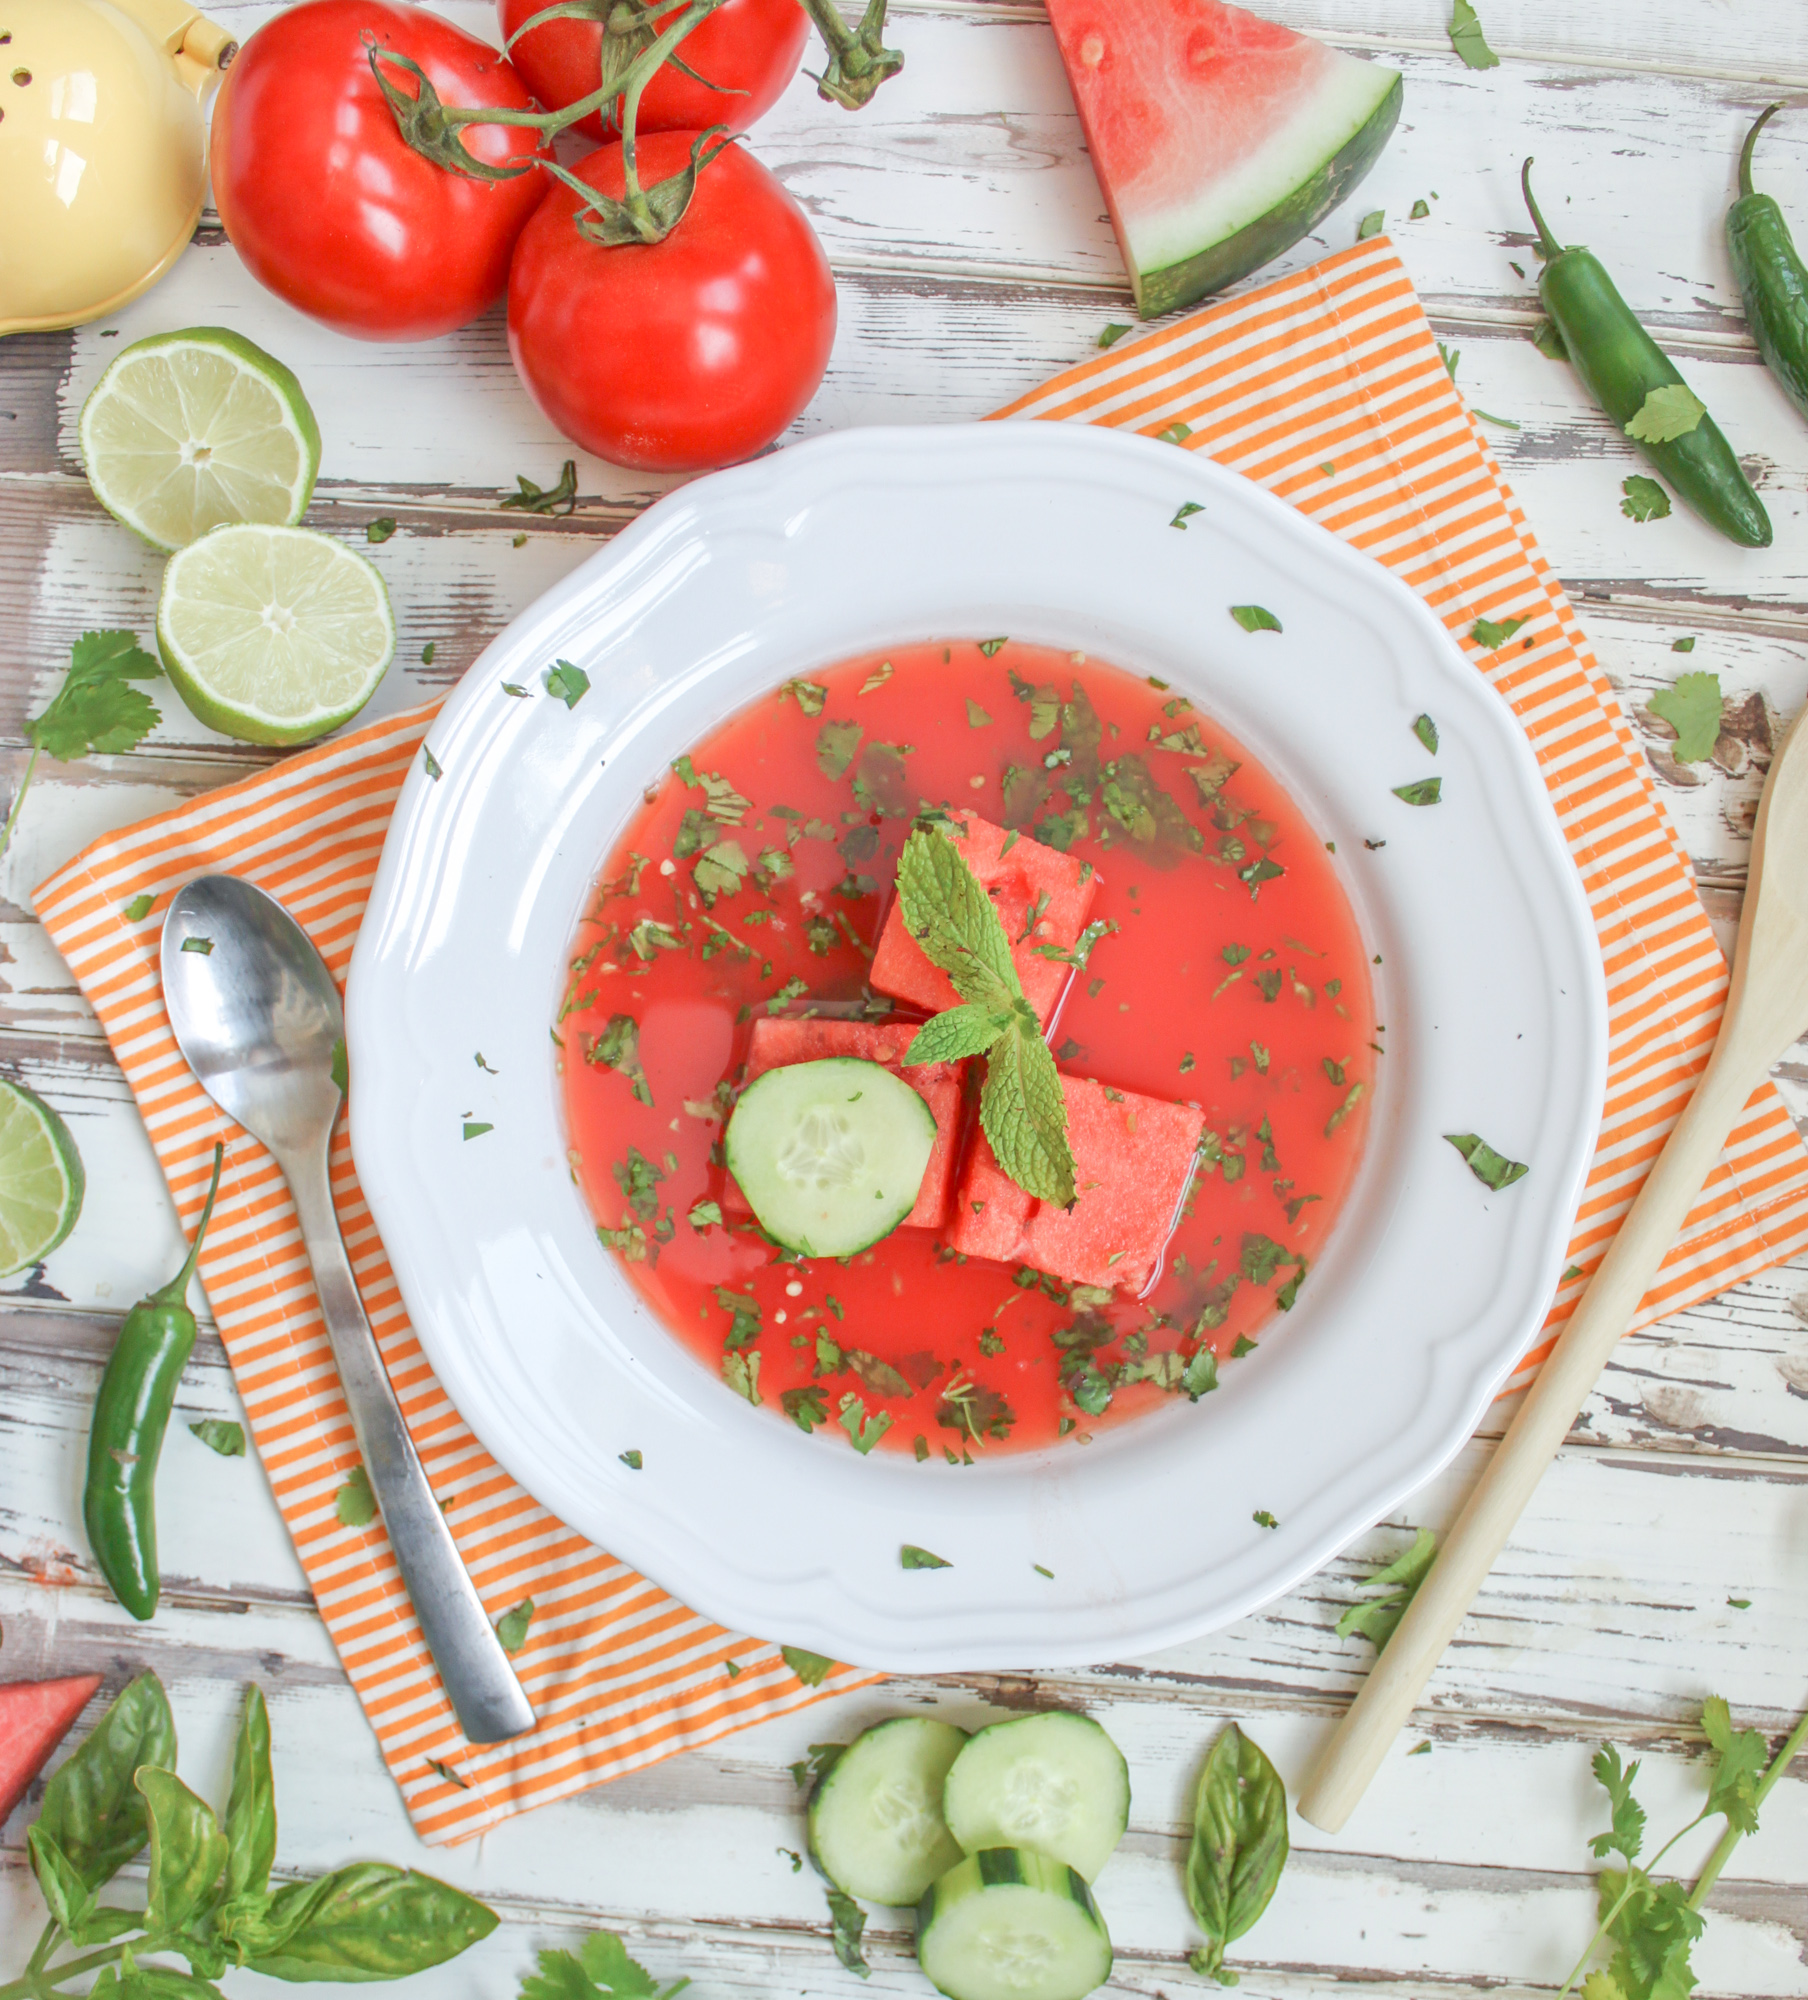 Gazpacho Recipes You Won’t Believe Are Healthy | Simple Healthy Recipes For Everyone